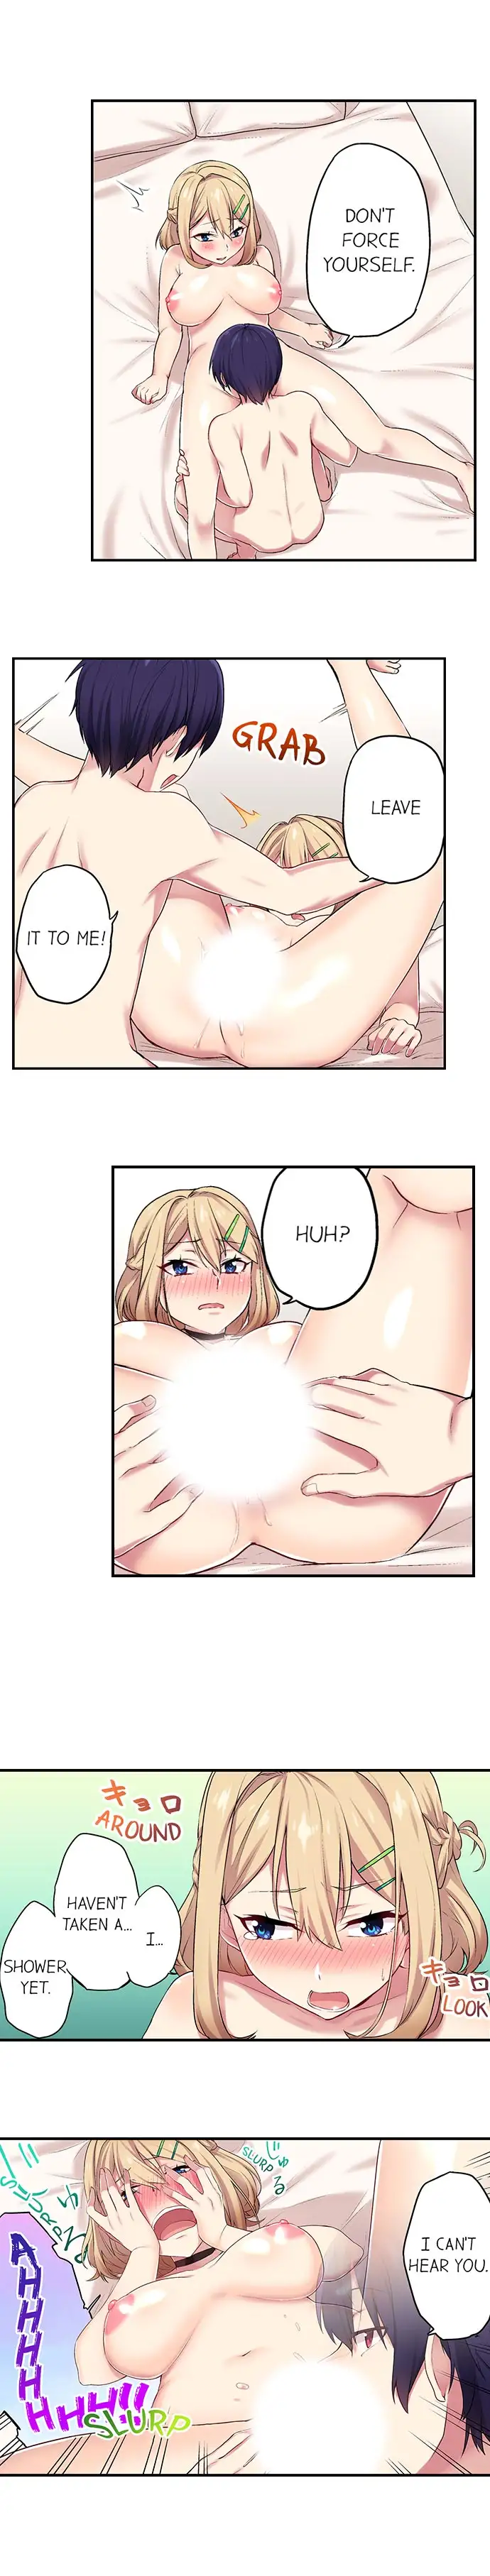 Committee Chairman, Didn’t You Just Masturbate In the Bathroom? I Can See the Number of Times People Orgasm - Chapter 4 Page 5